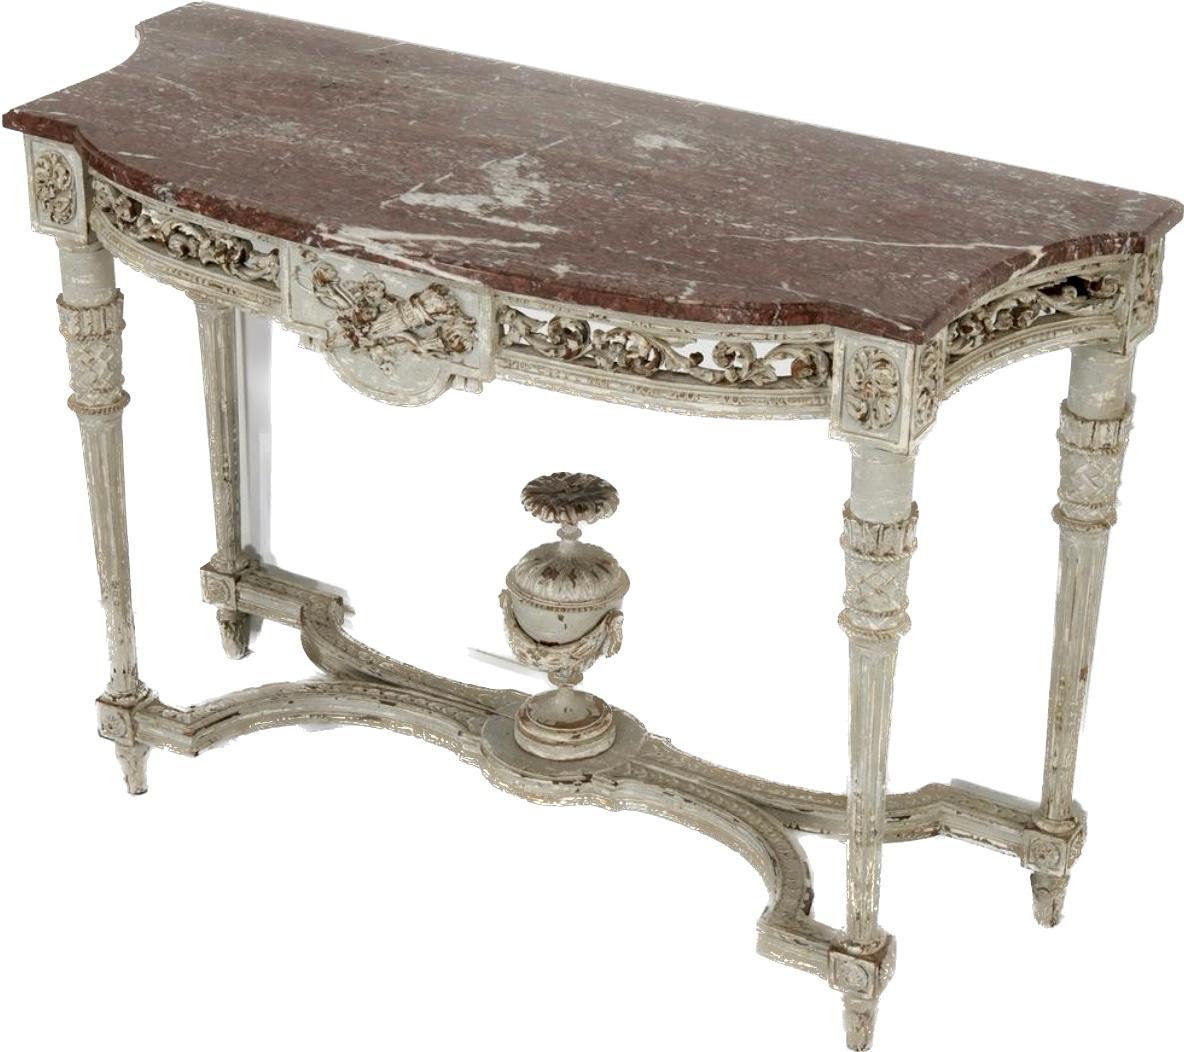 Antique Louis XVI style painted wood console, 19th Century, France. Grey painted carved wood, rouge breche marble, the shaped top with molded edge, over a conforming frieze carved with a central crest of crossed quiver and torch, flanked by open